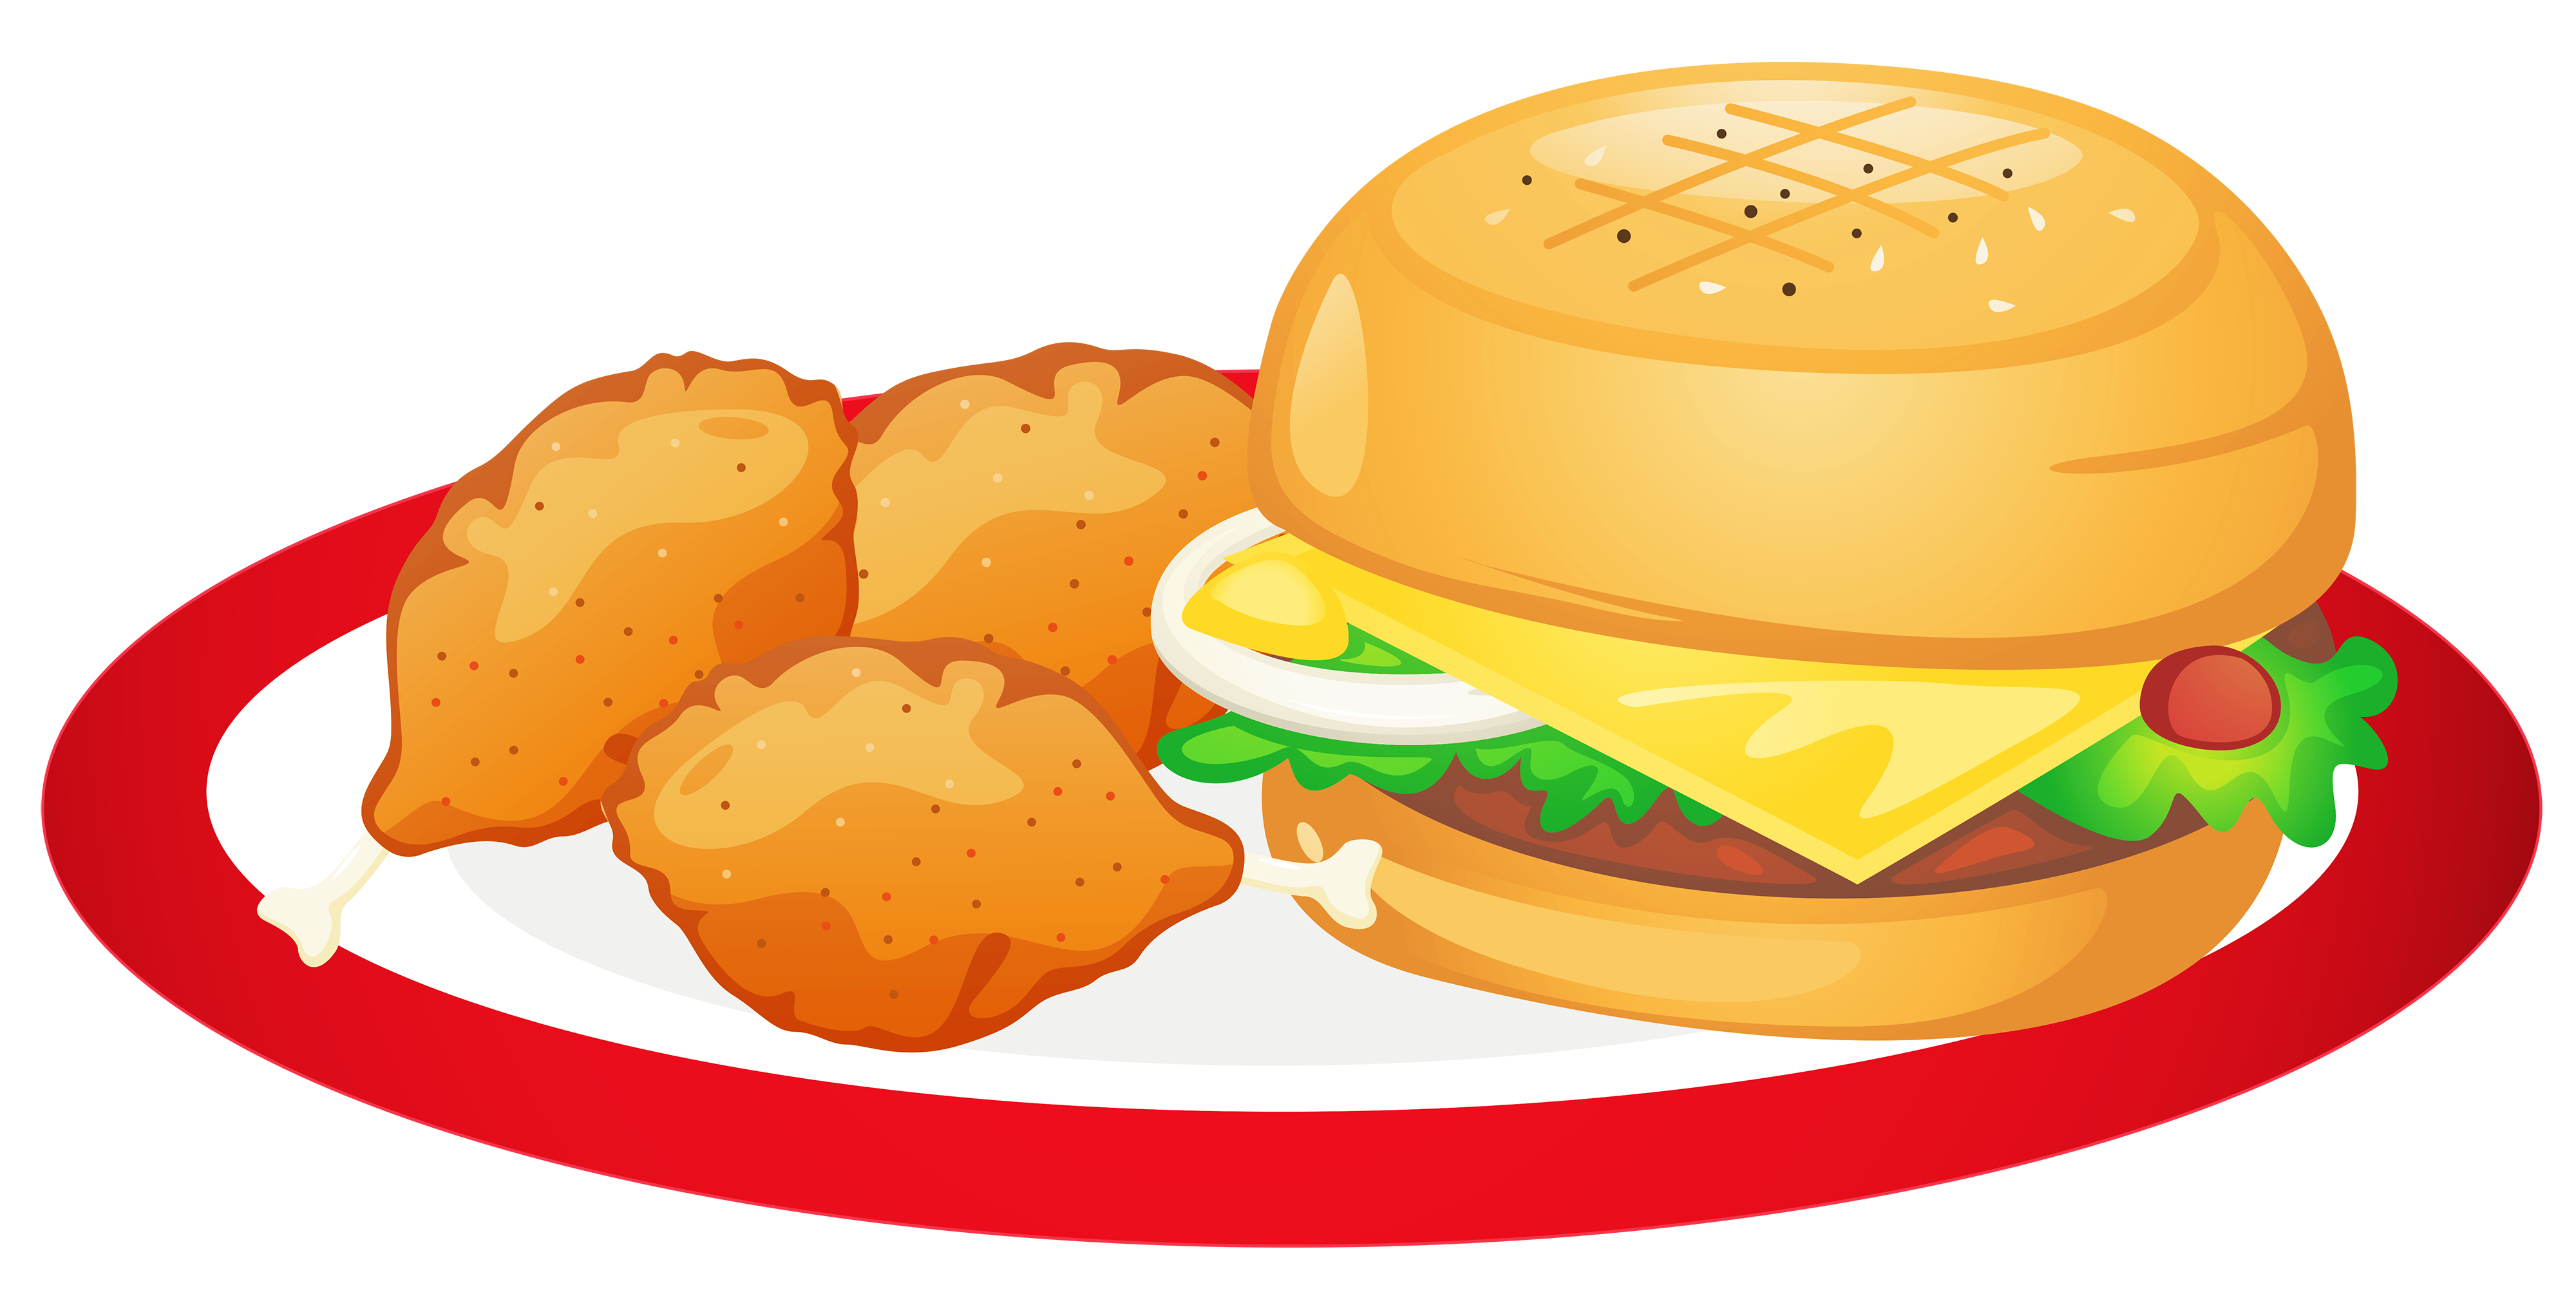 Plate Of Food Clip Art Free I